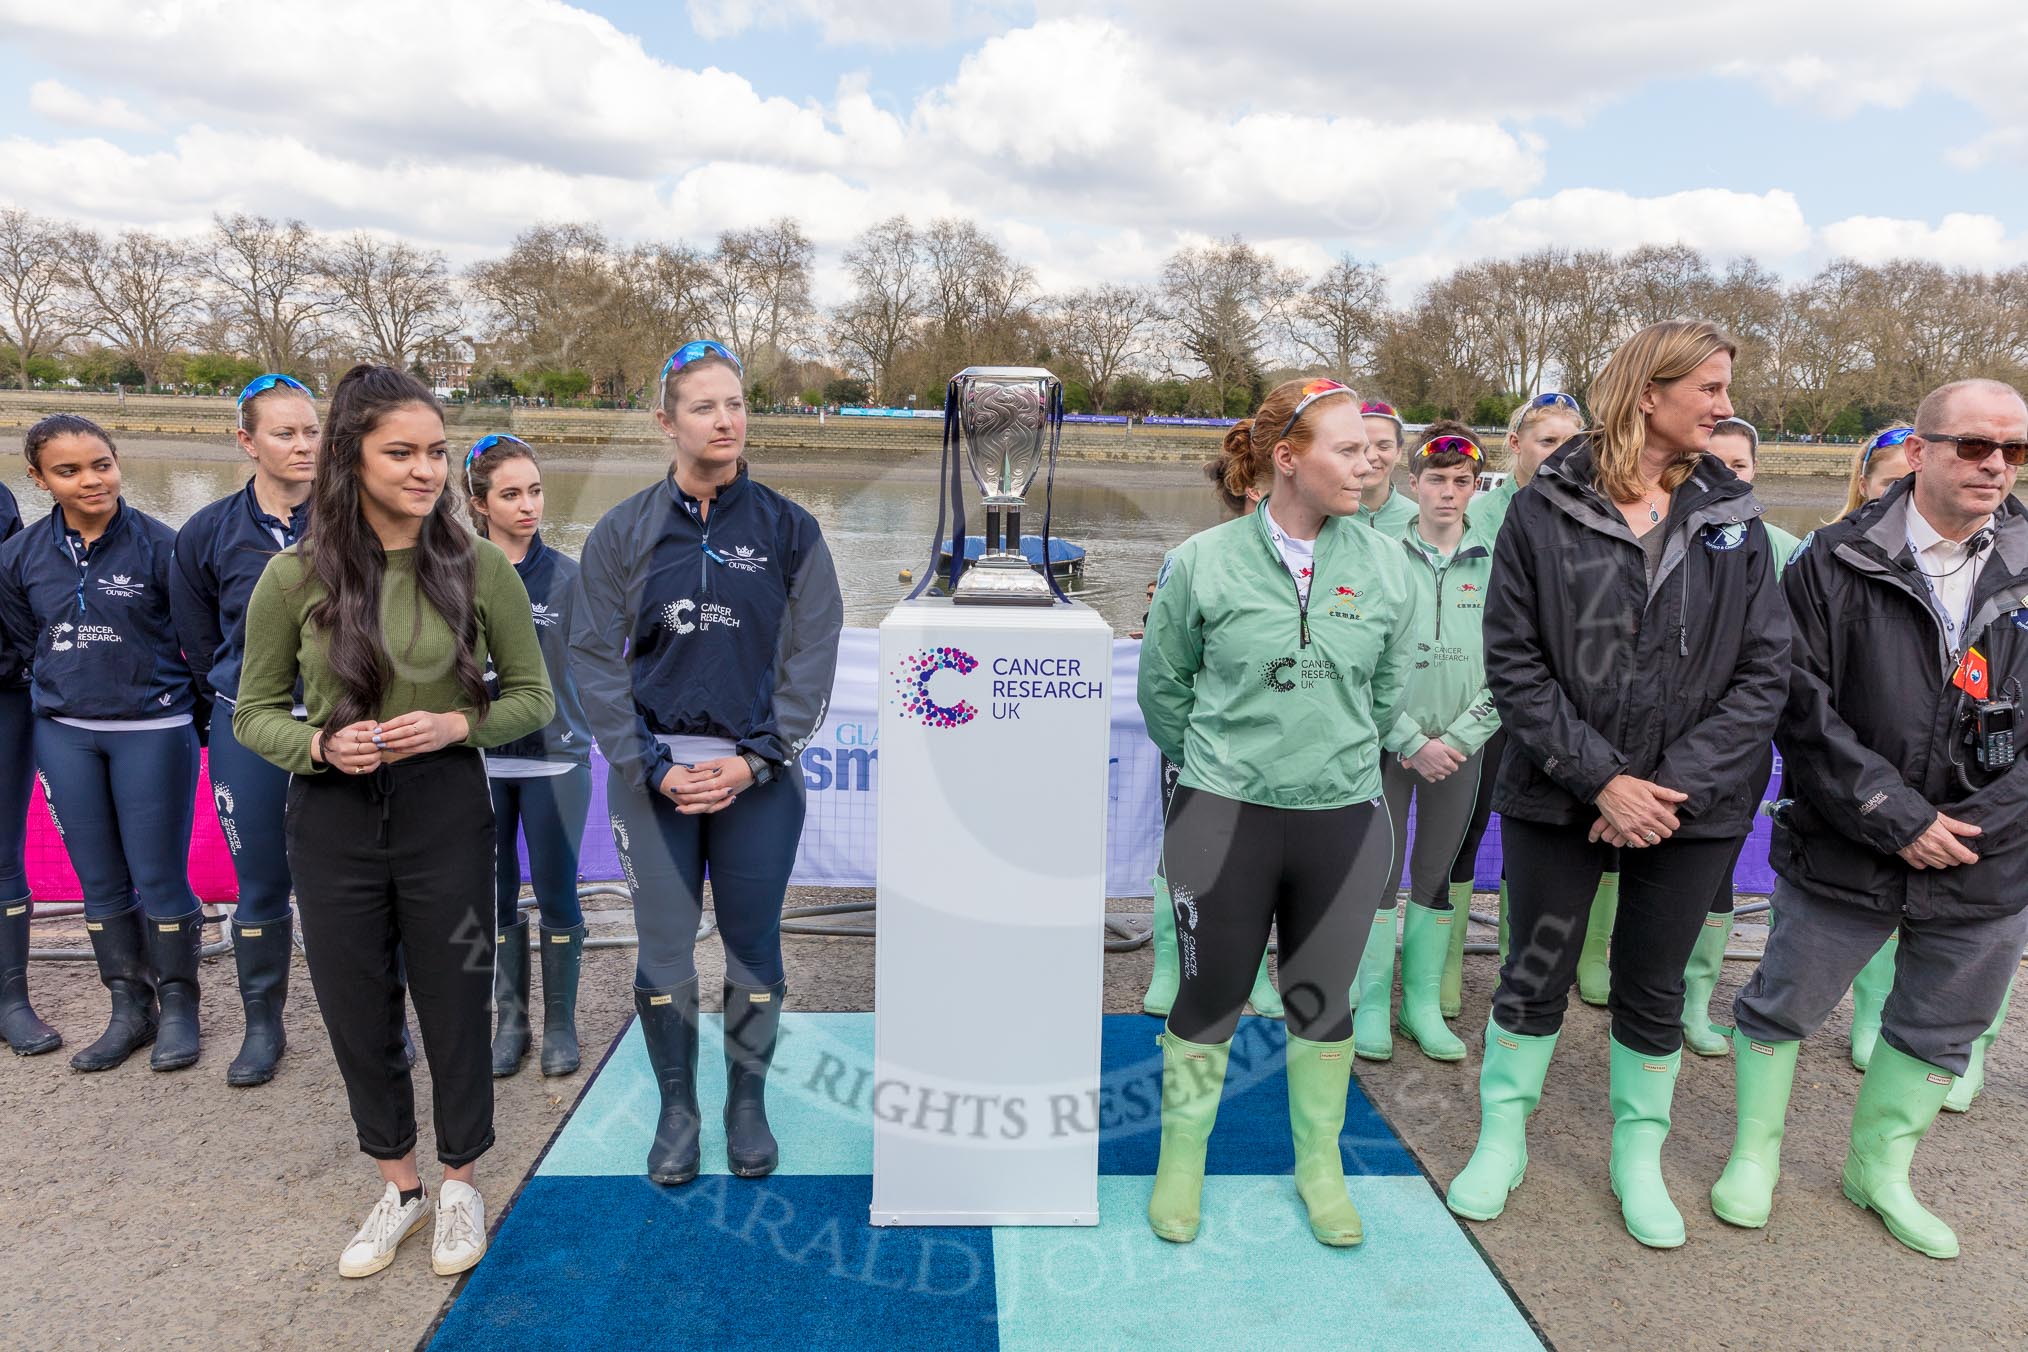 The Boat Race season 2017 -  The Cancer Research Women's Boat Race.
River Thames between Putney Bridge and Mortlake,
London SW15,

United Kingdom,
on 02 April 2017 at 14:41, image #26